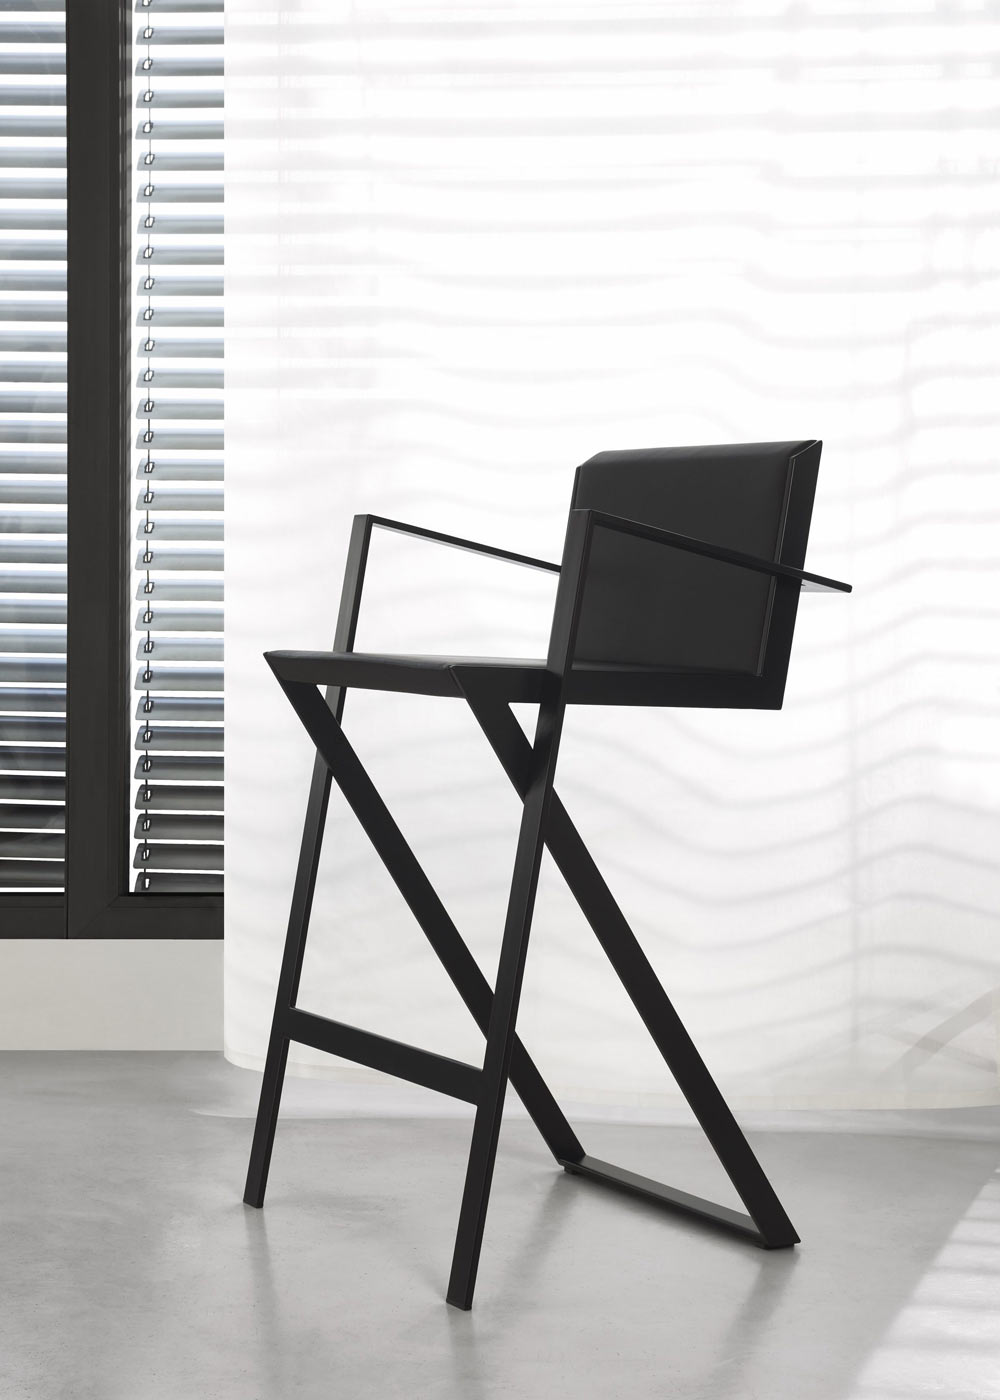 Project "Boaz Chair and Barstool", image 02 | Lev Libeskind